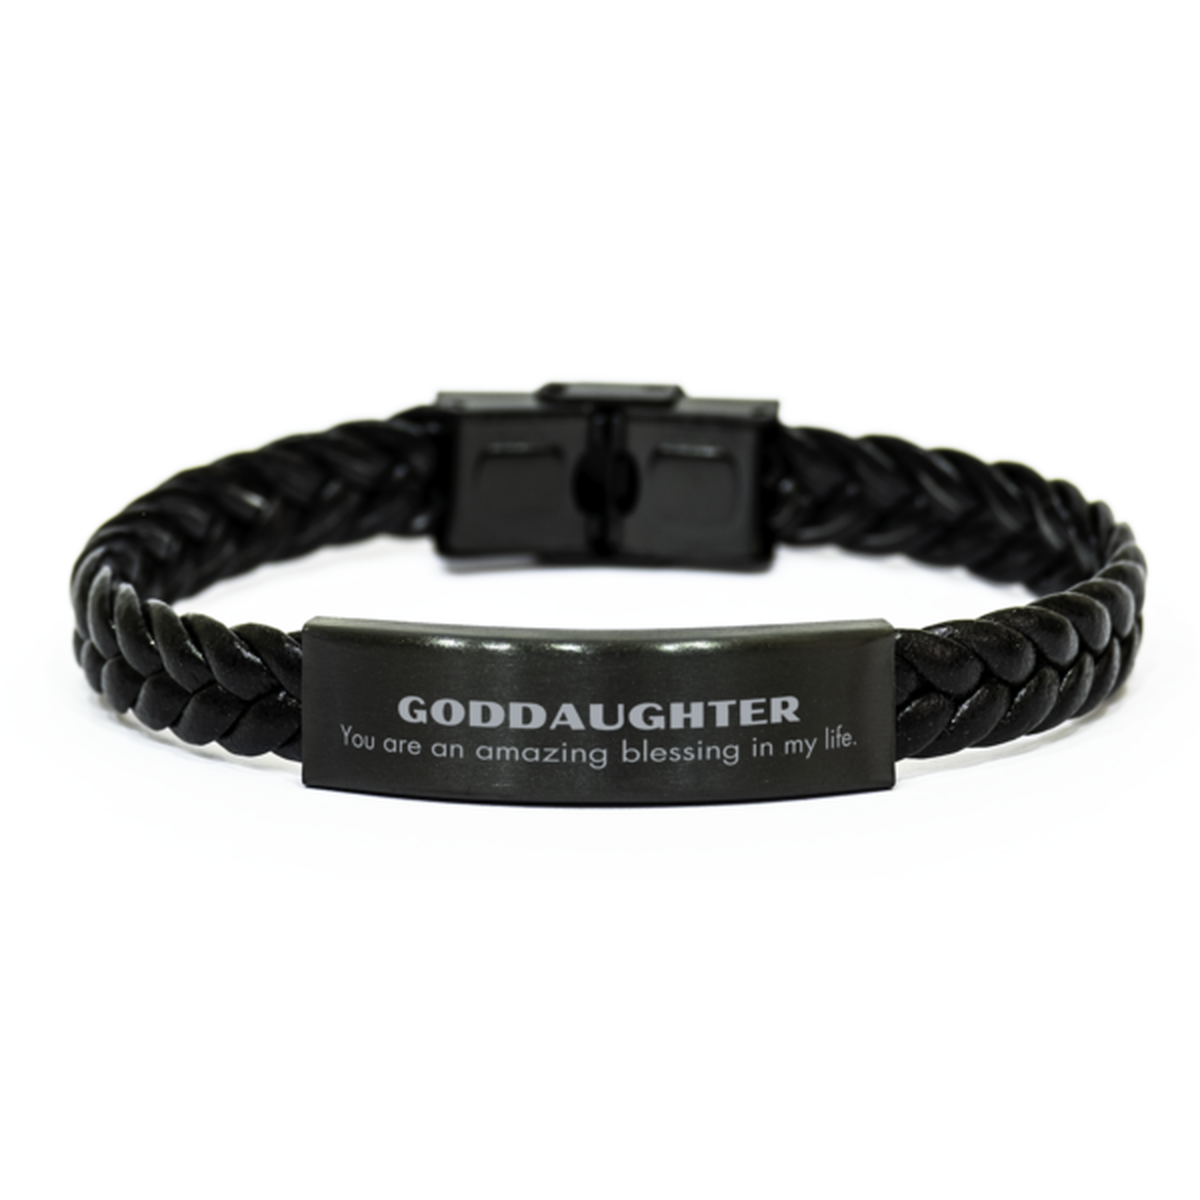 Goddaughter Braided Leather Bracelet, You are an amazing blessing in my life, Thank You Gifts For Goddaughter, Inspirational Birthday Christmas Unique Gifts For Goddaughter